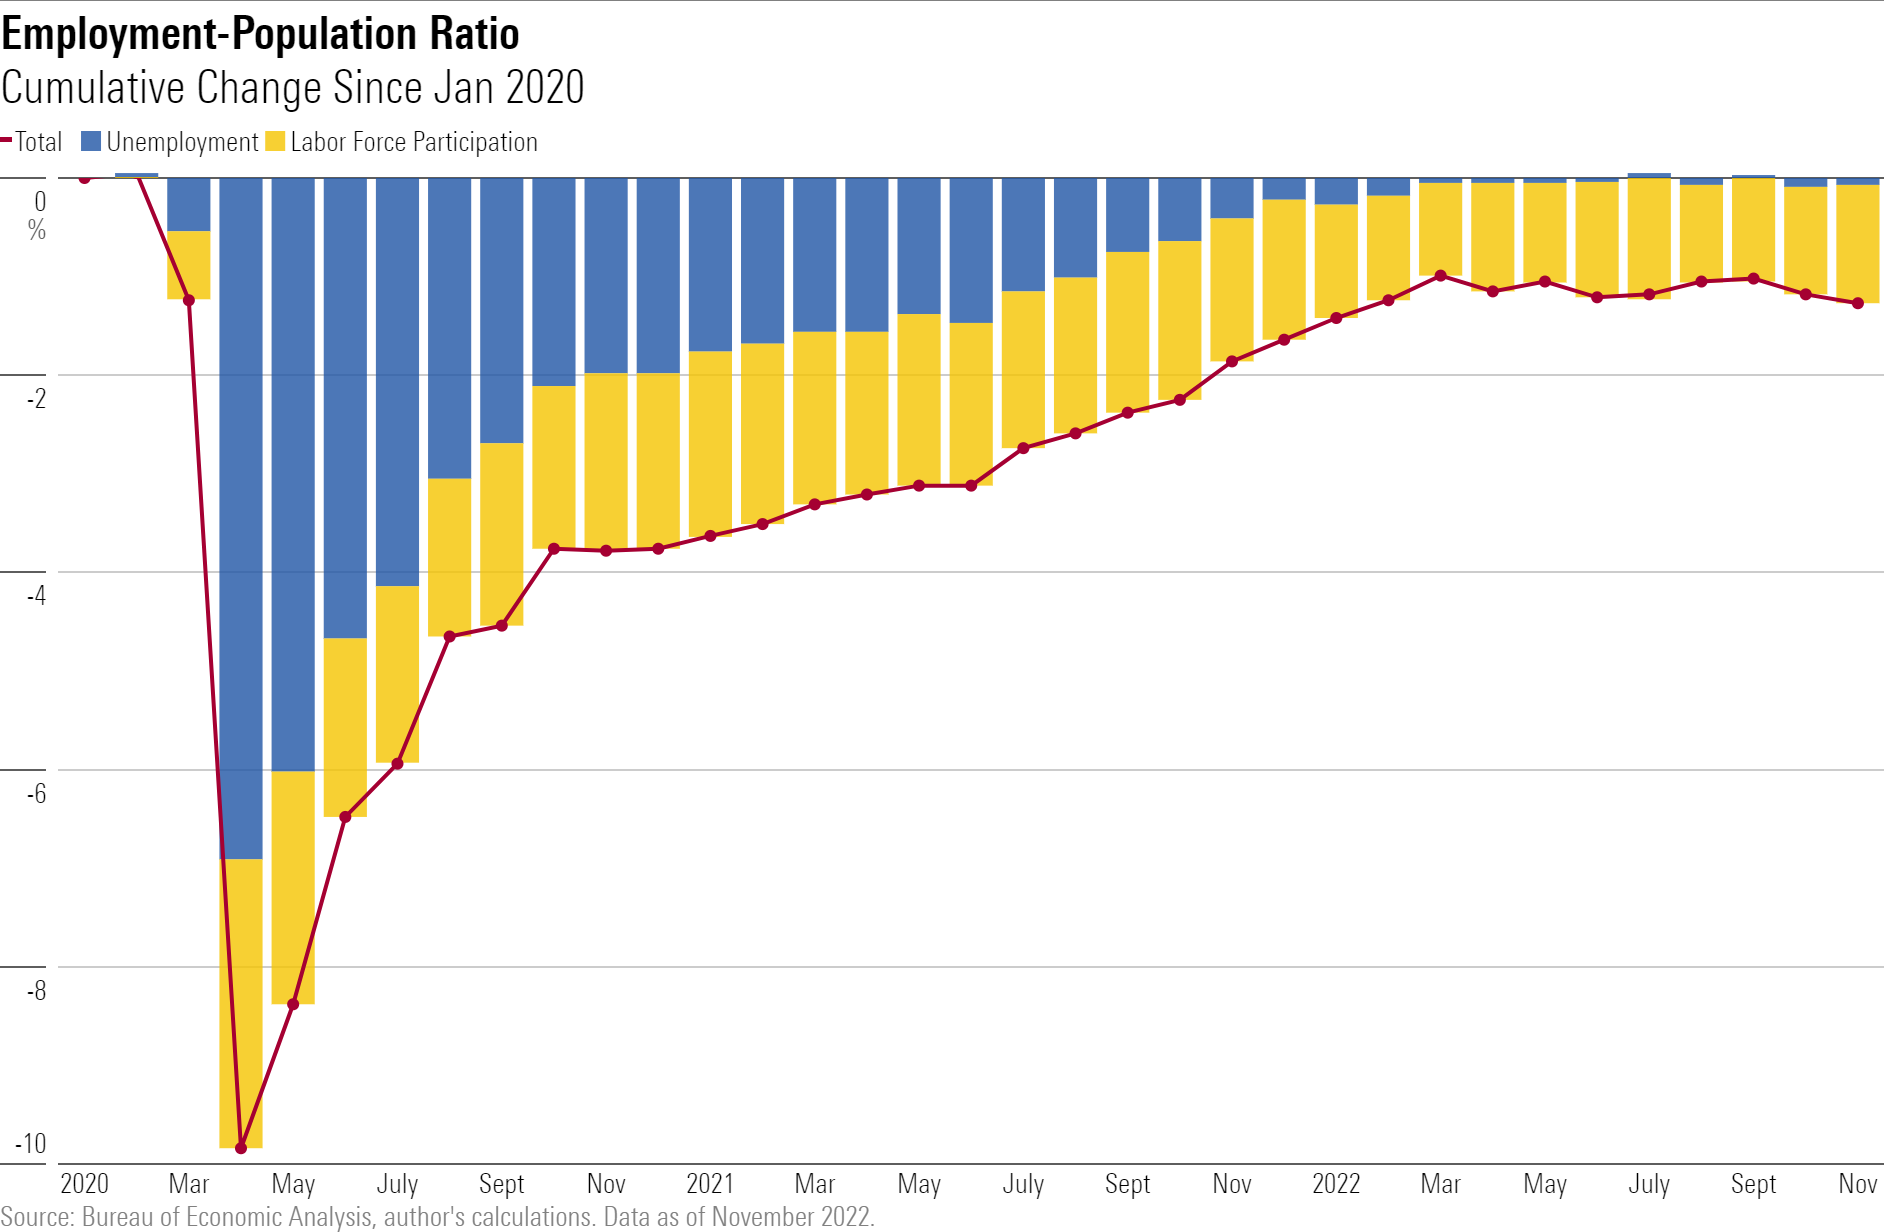 Cumulative change in employment and labor force participation since Jan 2020.